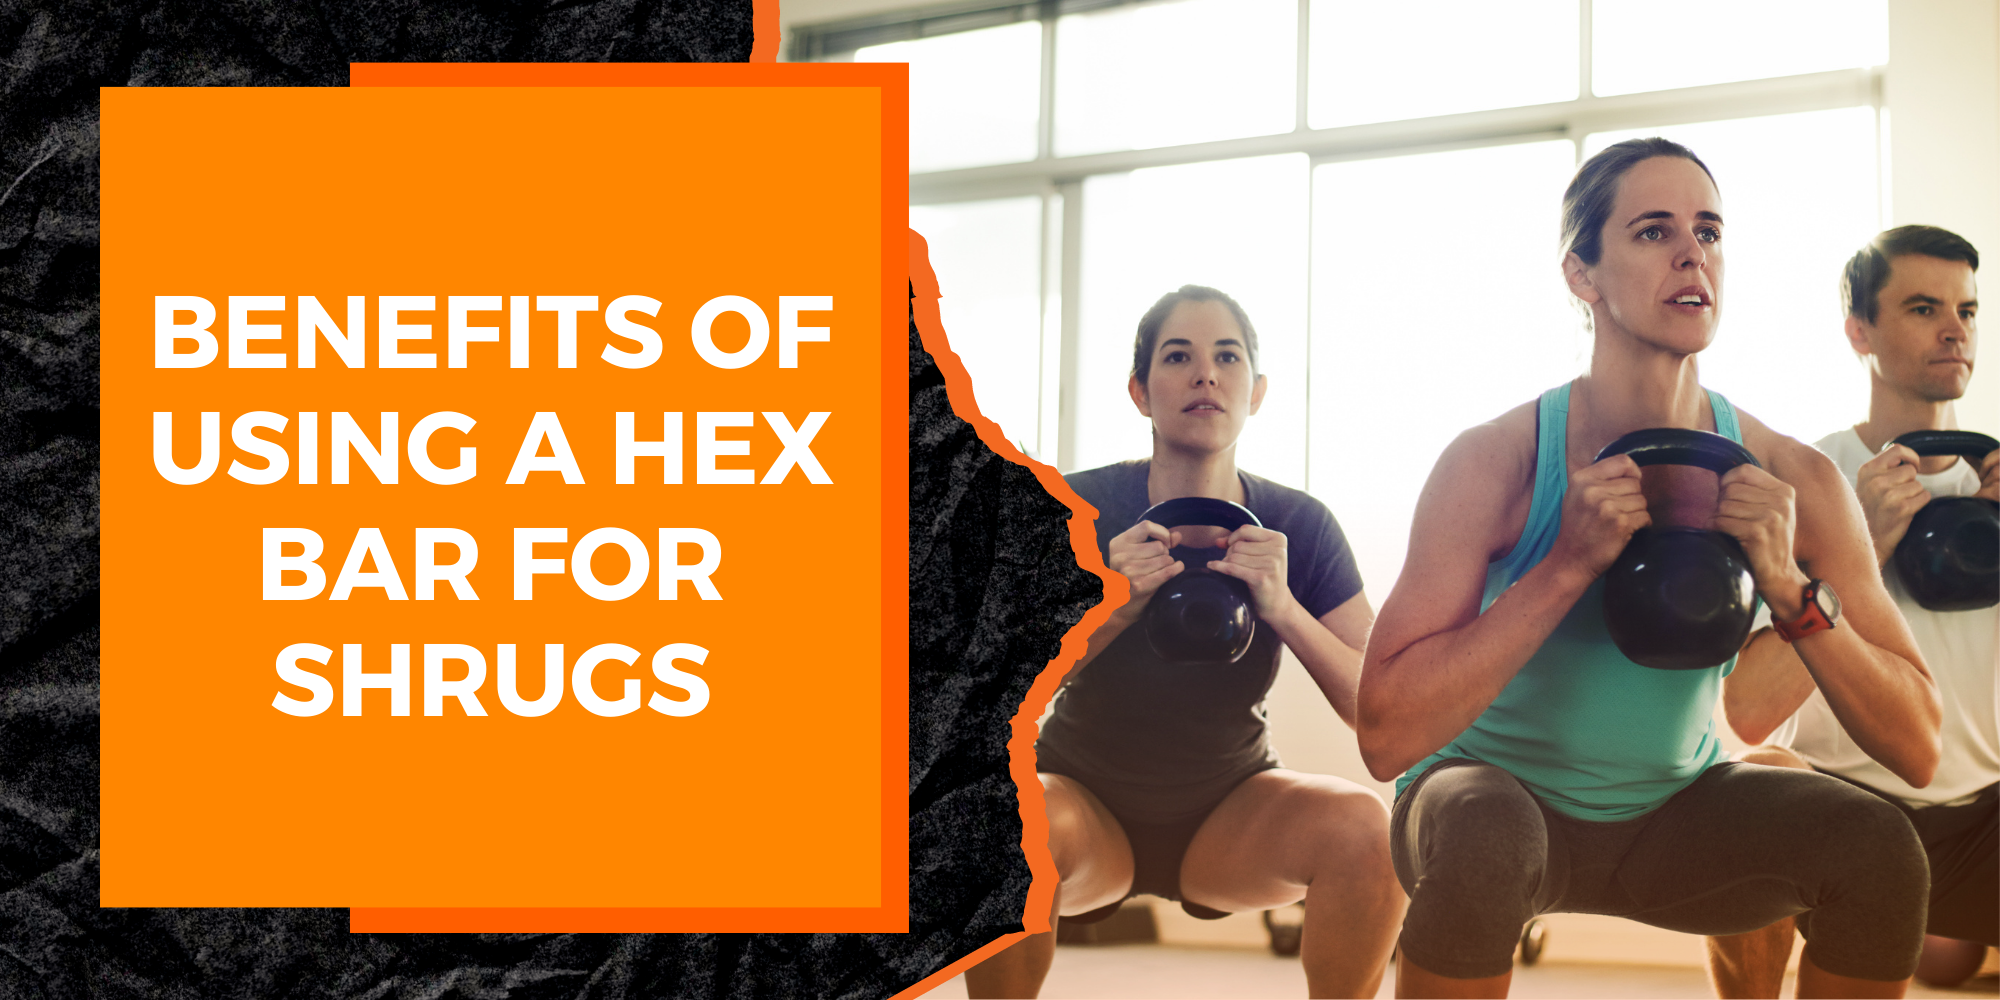 The Benefits of Using a Hex Bar for Shrugs